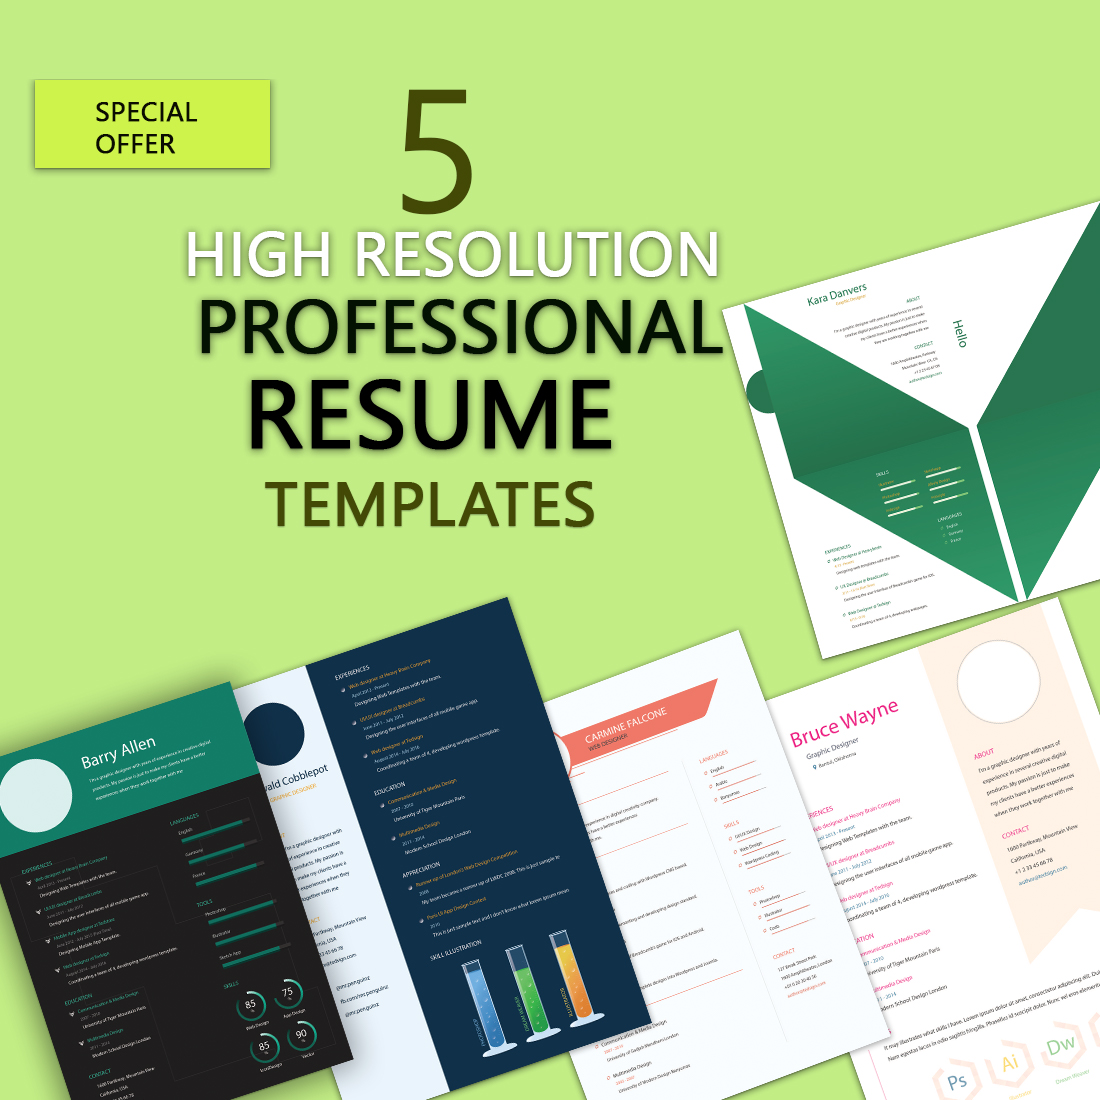 Five professional resume templates with a green background.